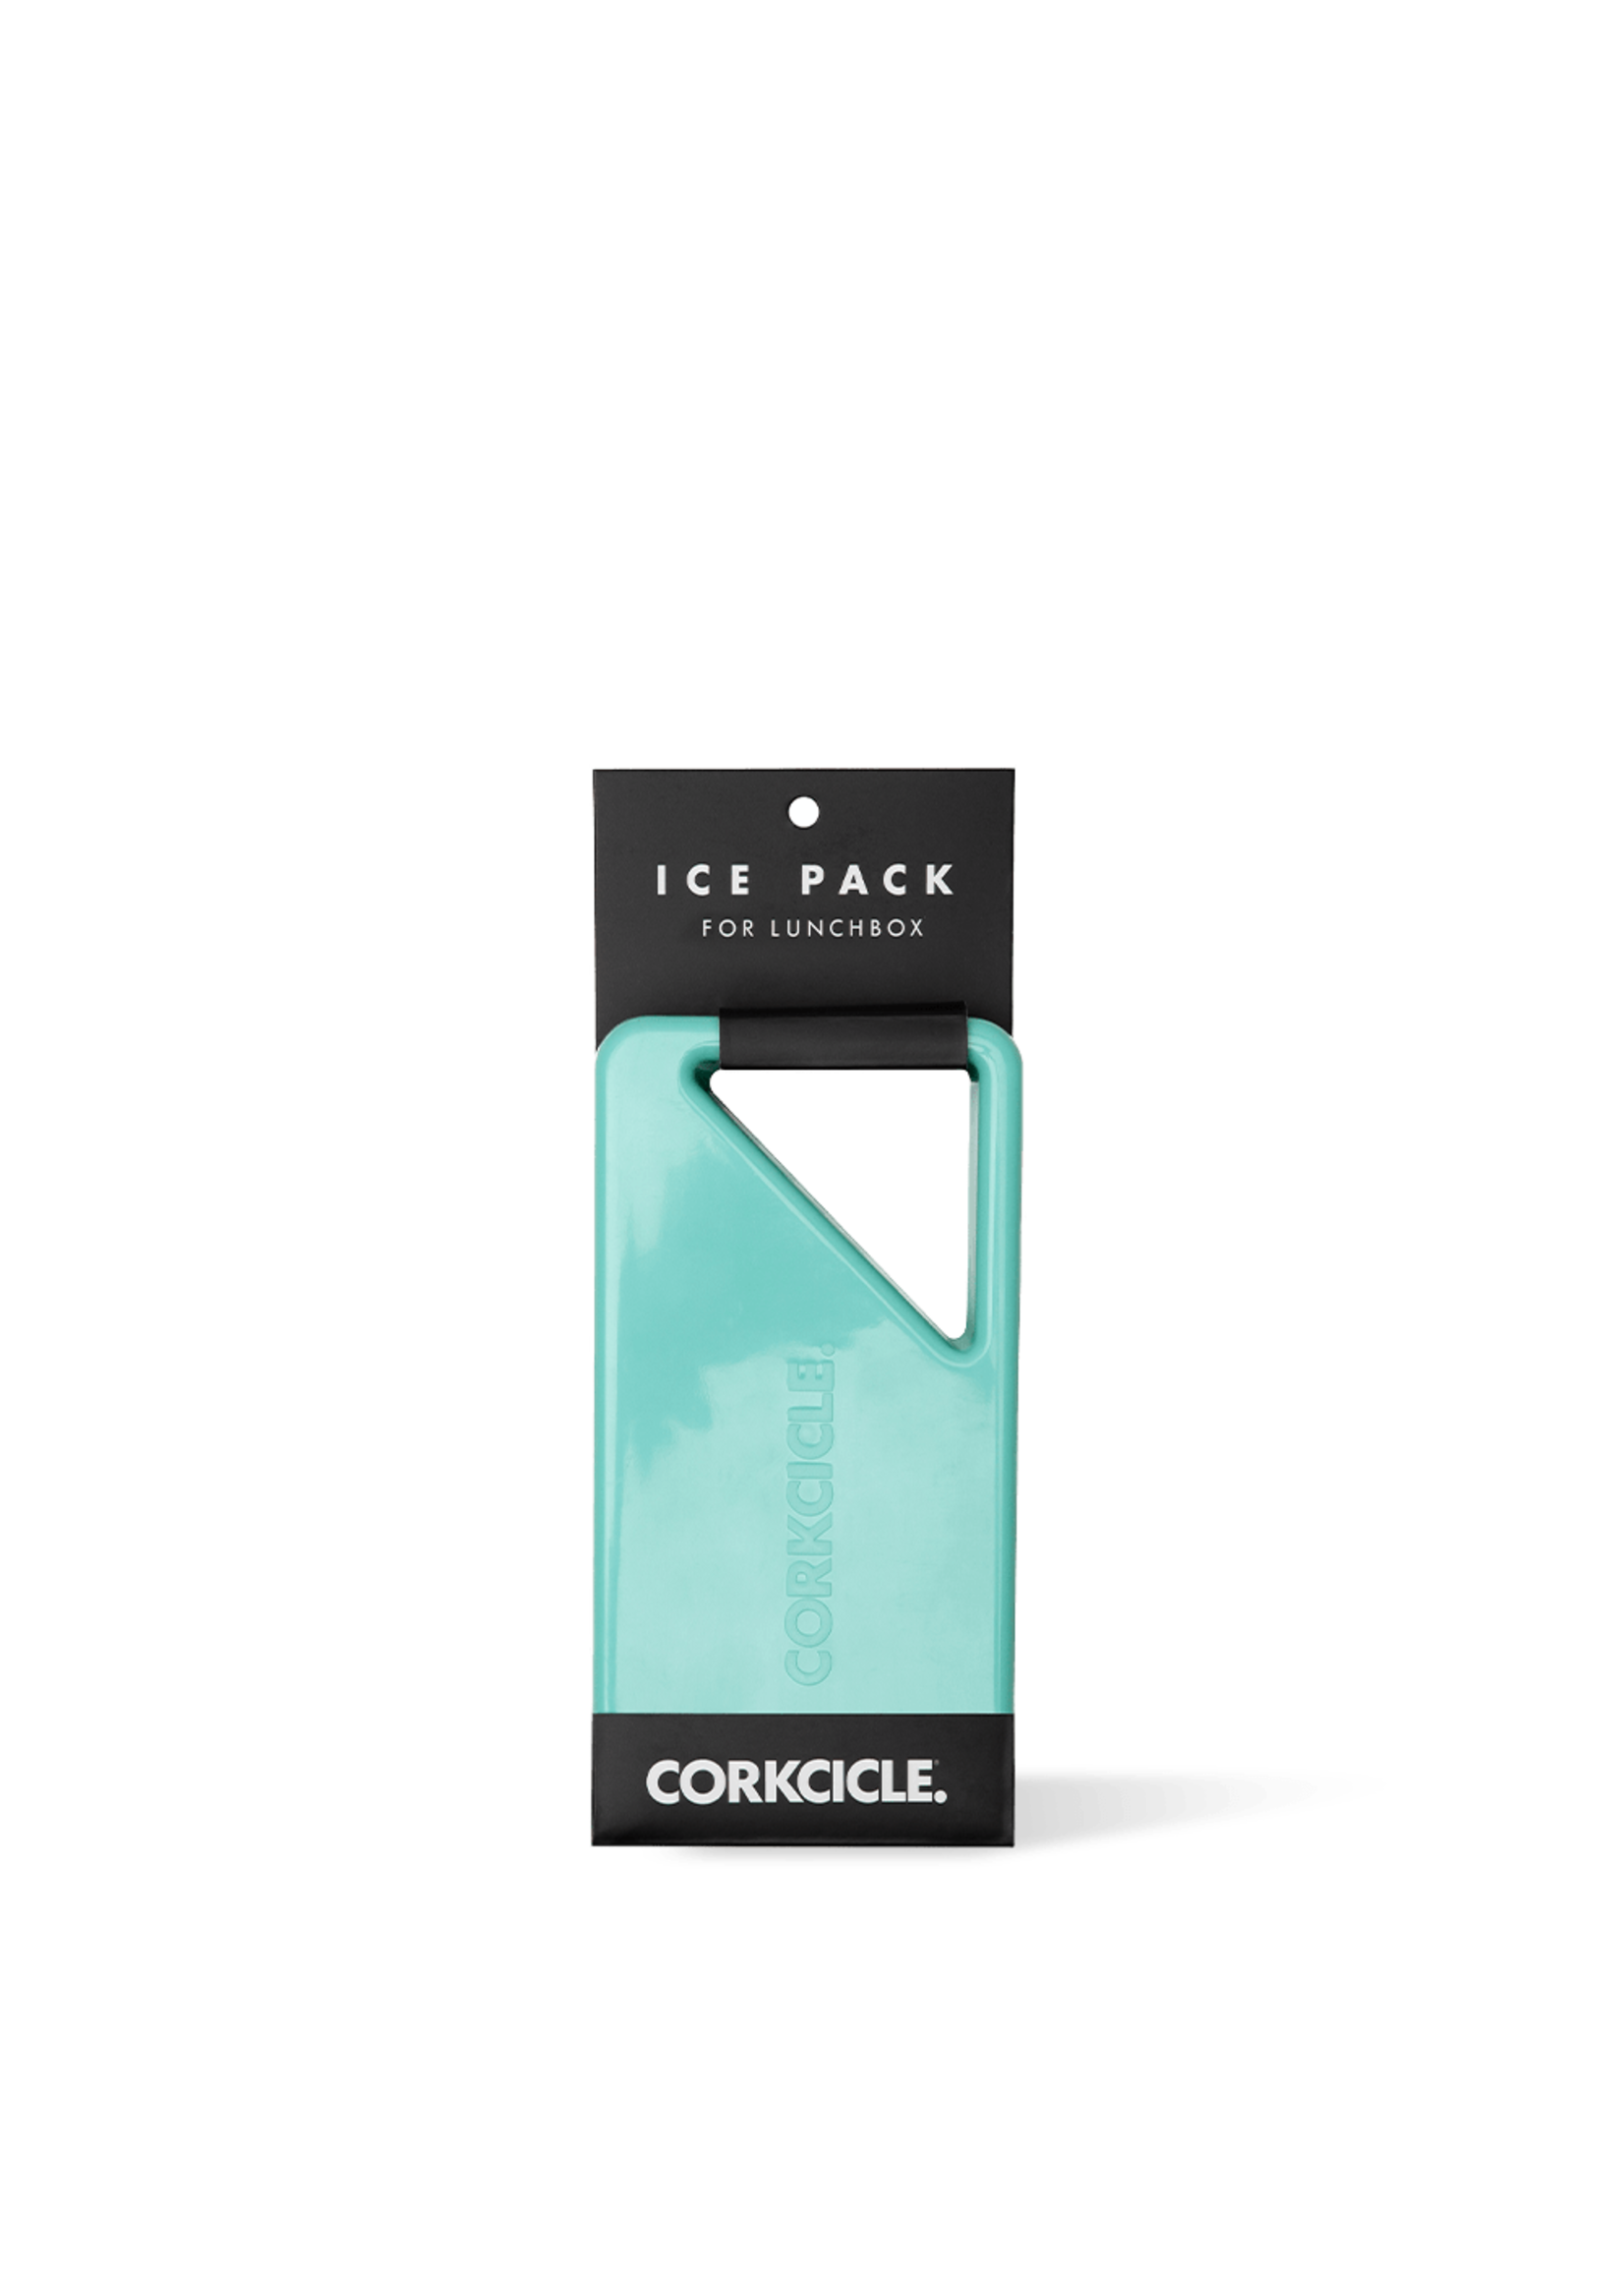 Corkcicle Ice Pack Lunchbox